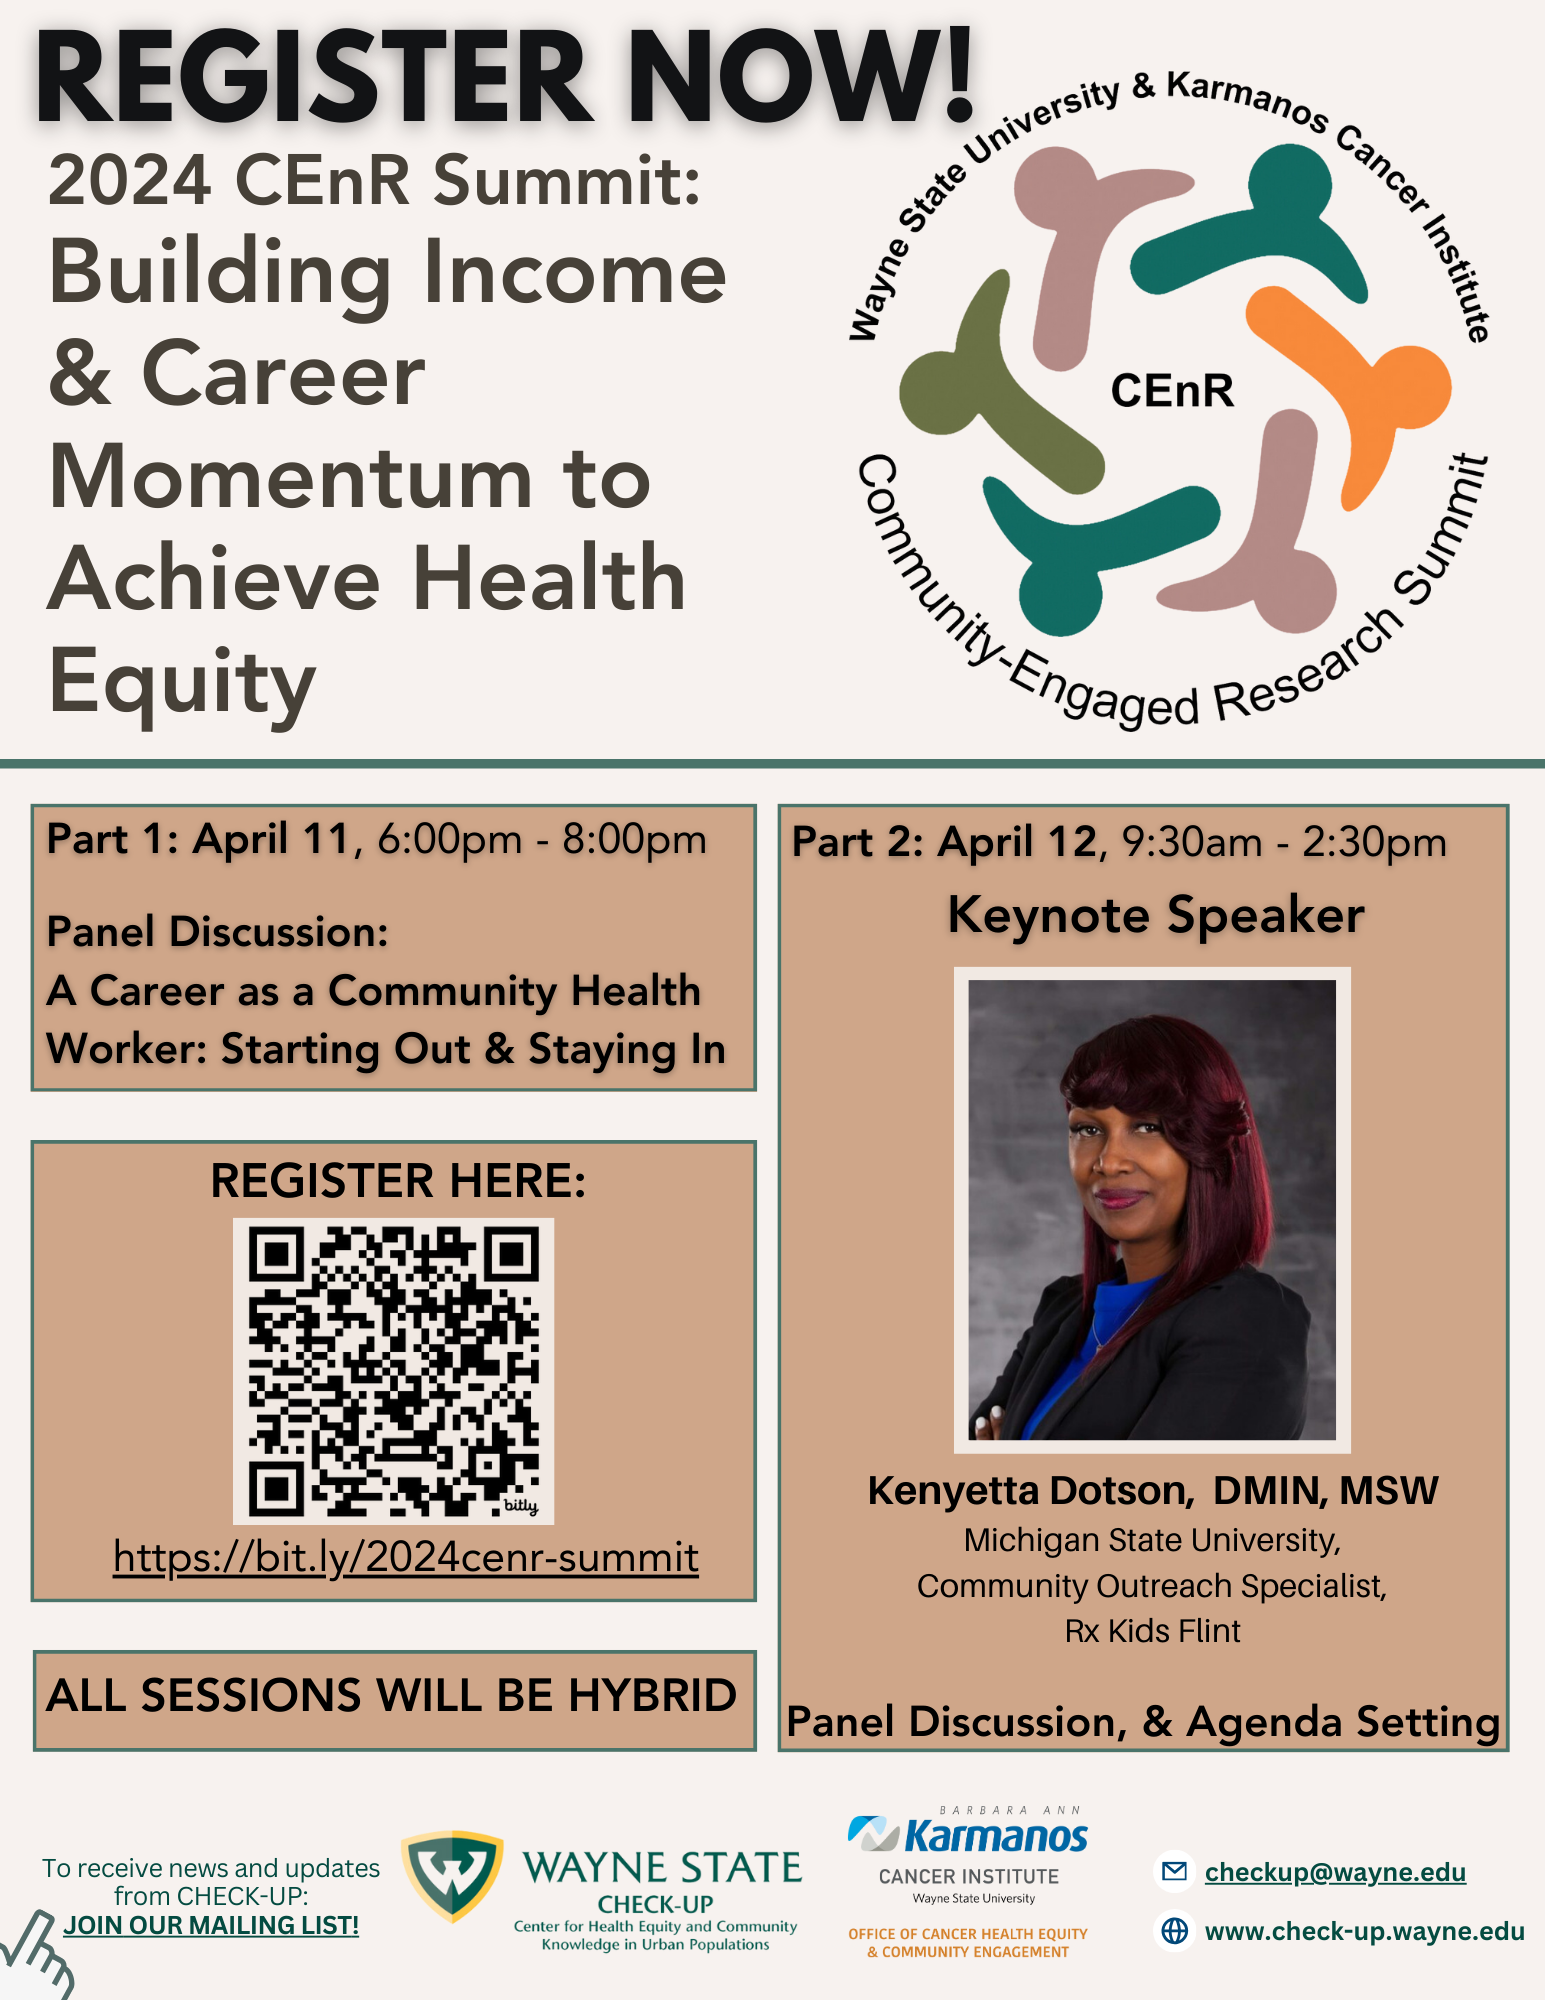 2024 CEnR Summit: Building Income and Career Momentum to Achieve Health Equity